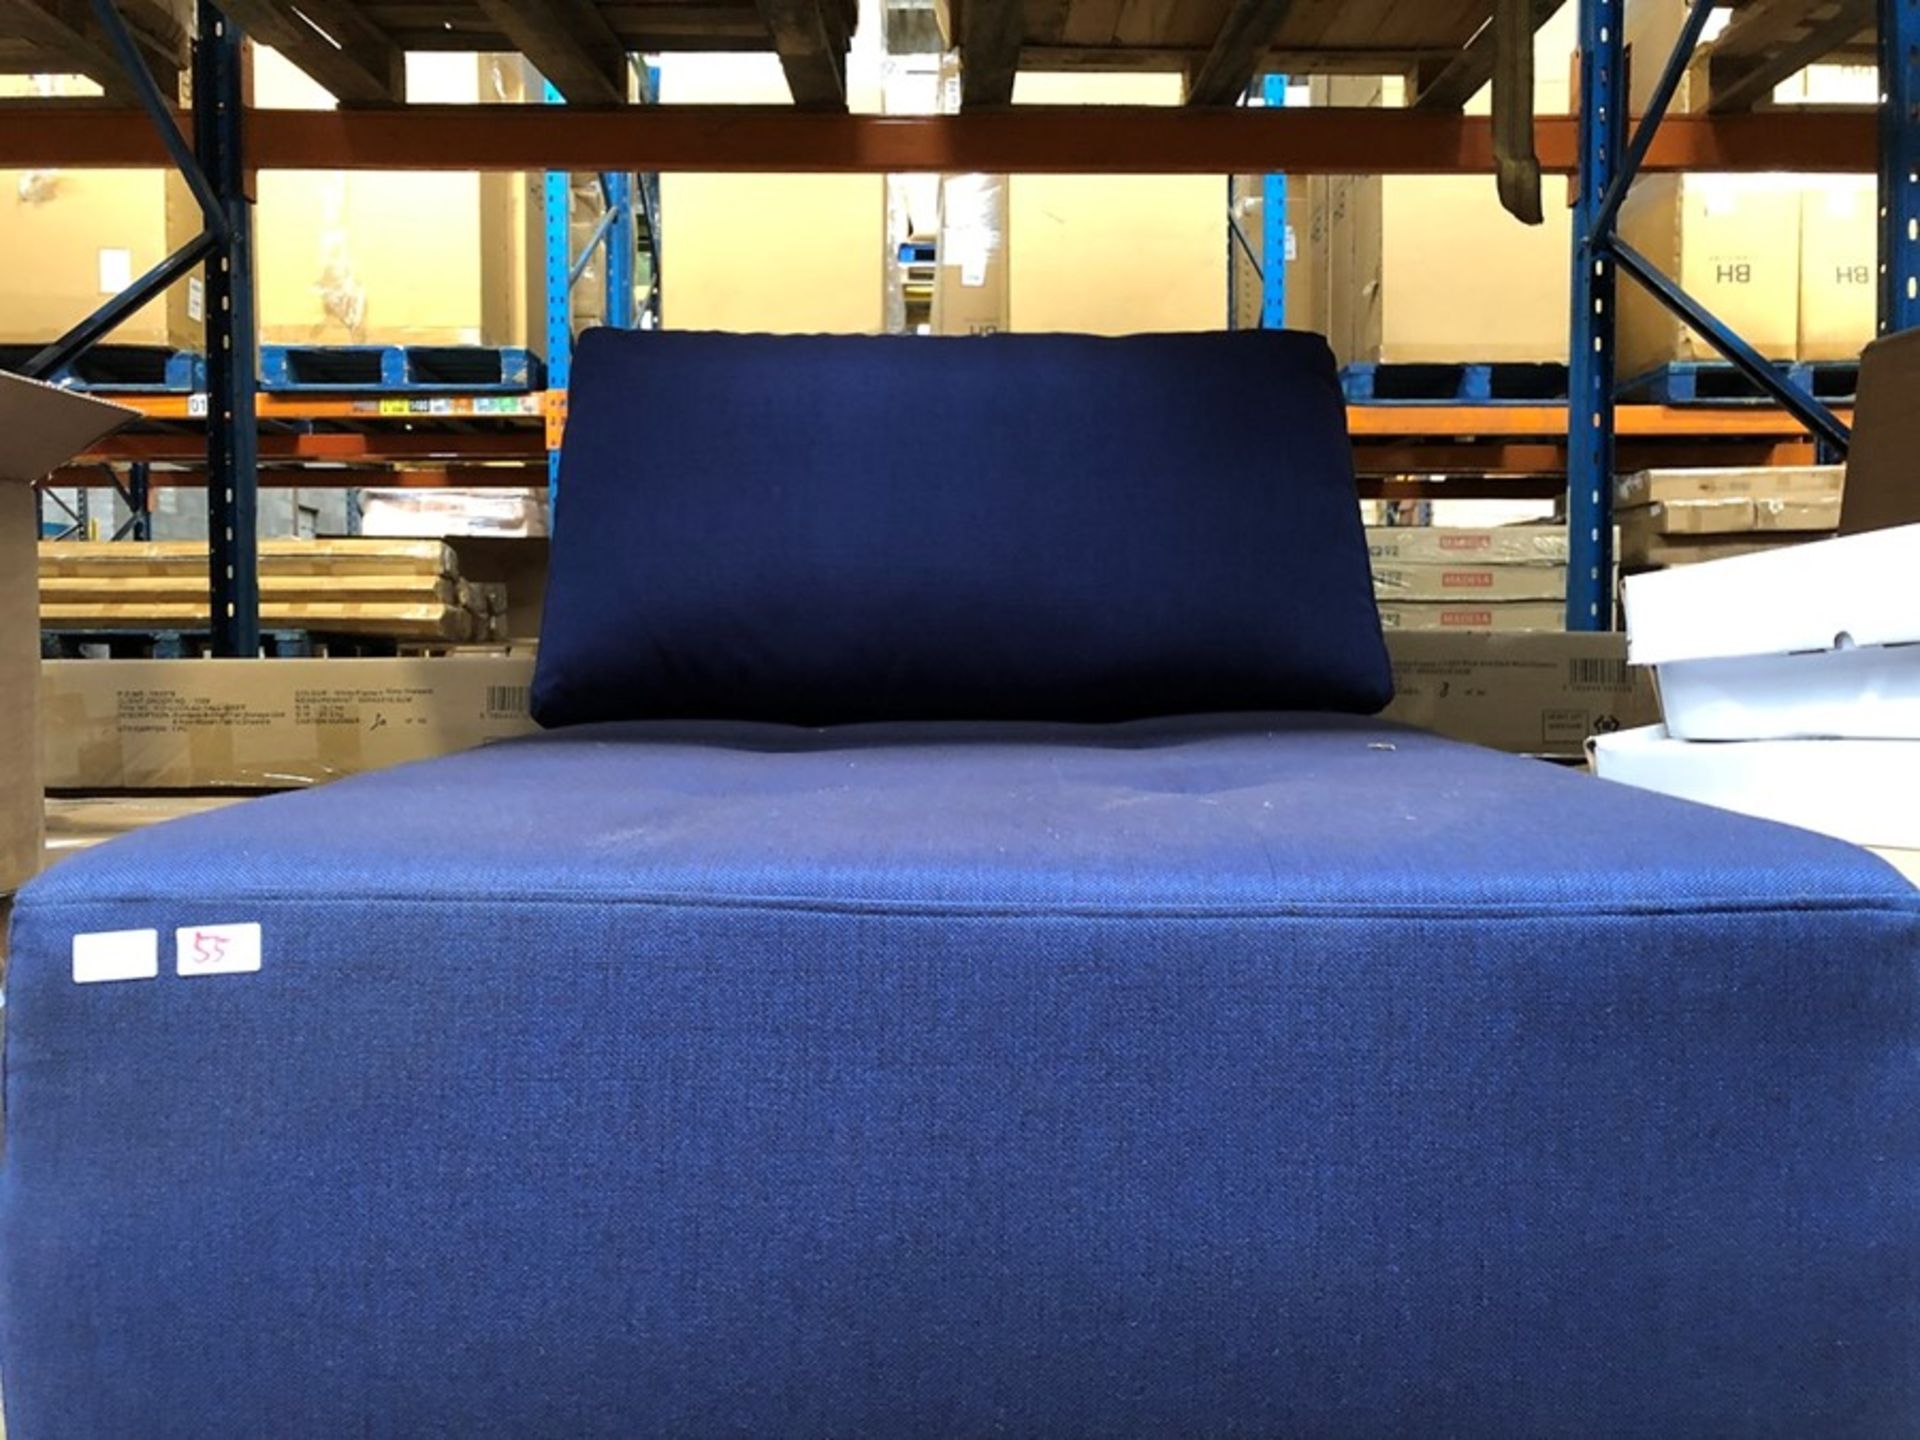 1 SINGLE SOFA IN NAVY BLUE (PUBLIC VIEWING AVAILABLE)